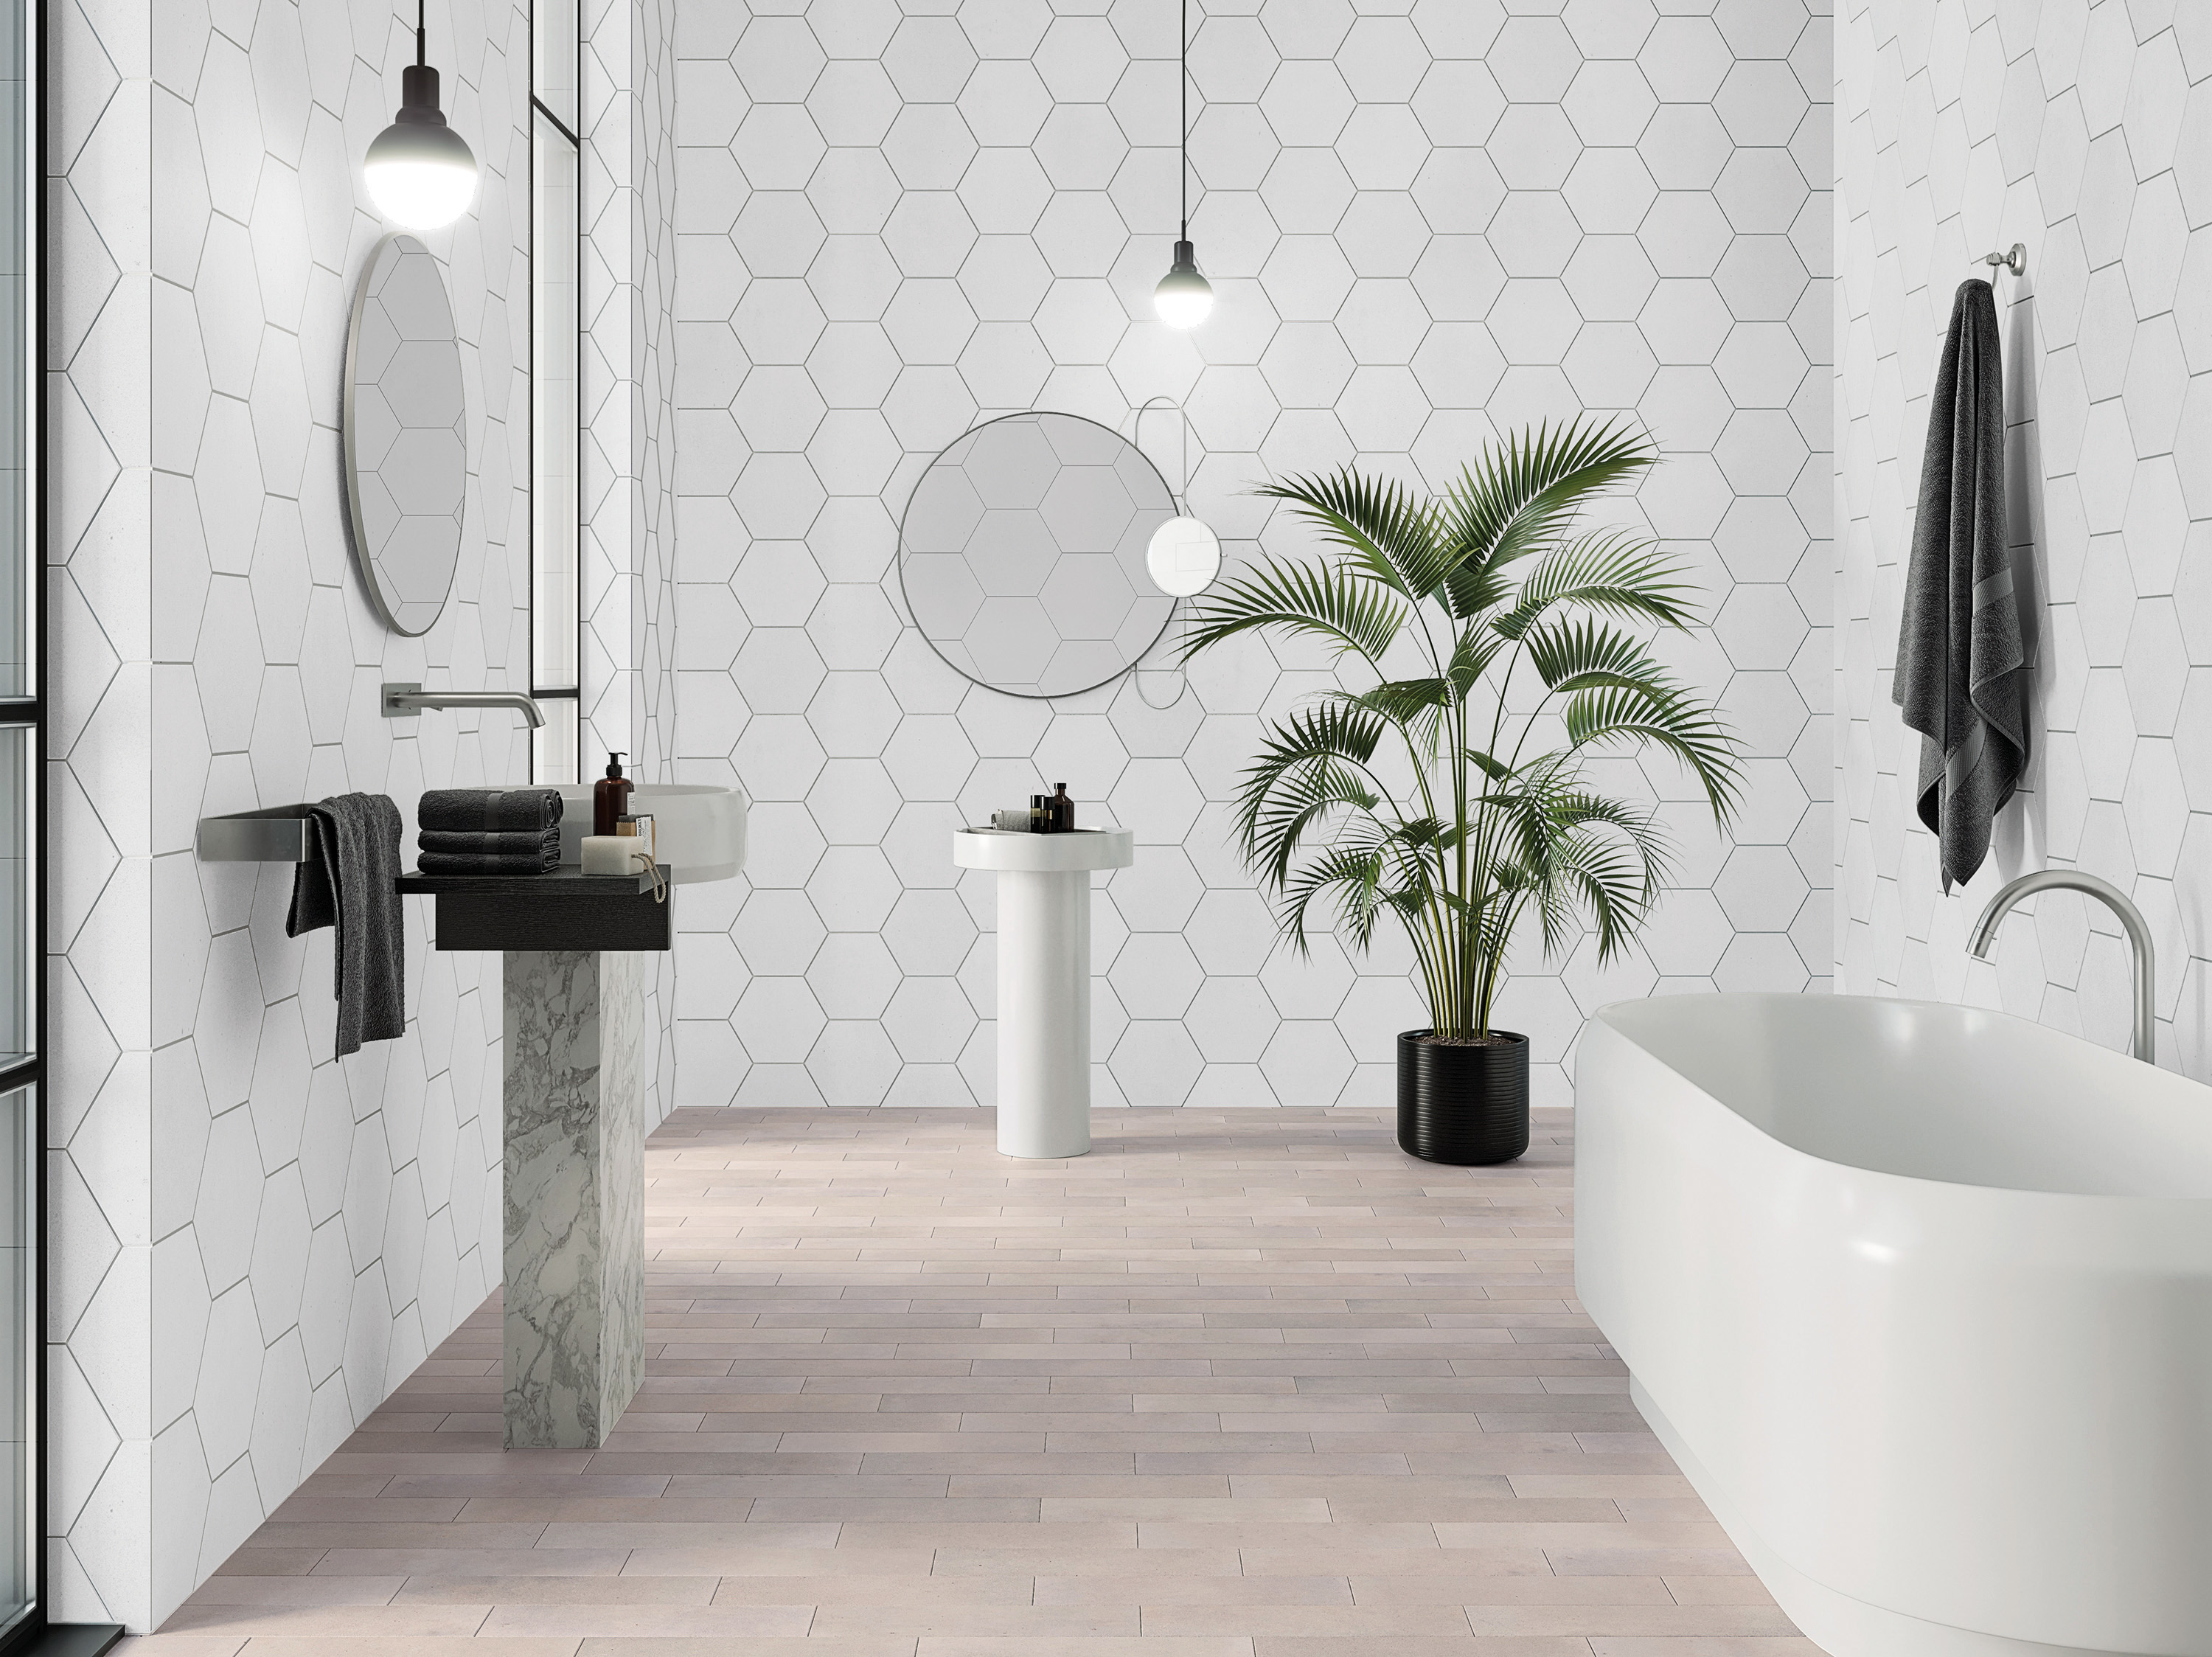 The Niza collection by Harmony comes in a wide variety of shapes.